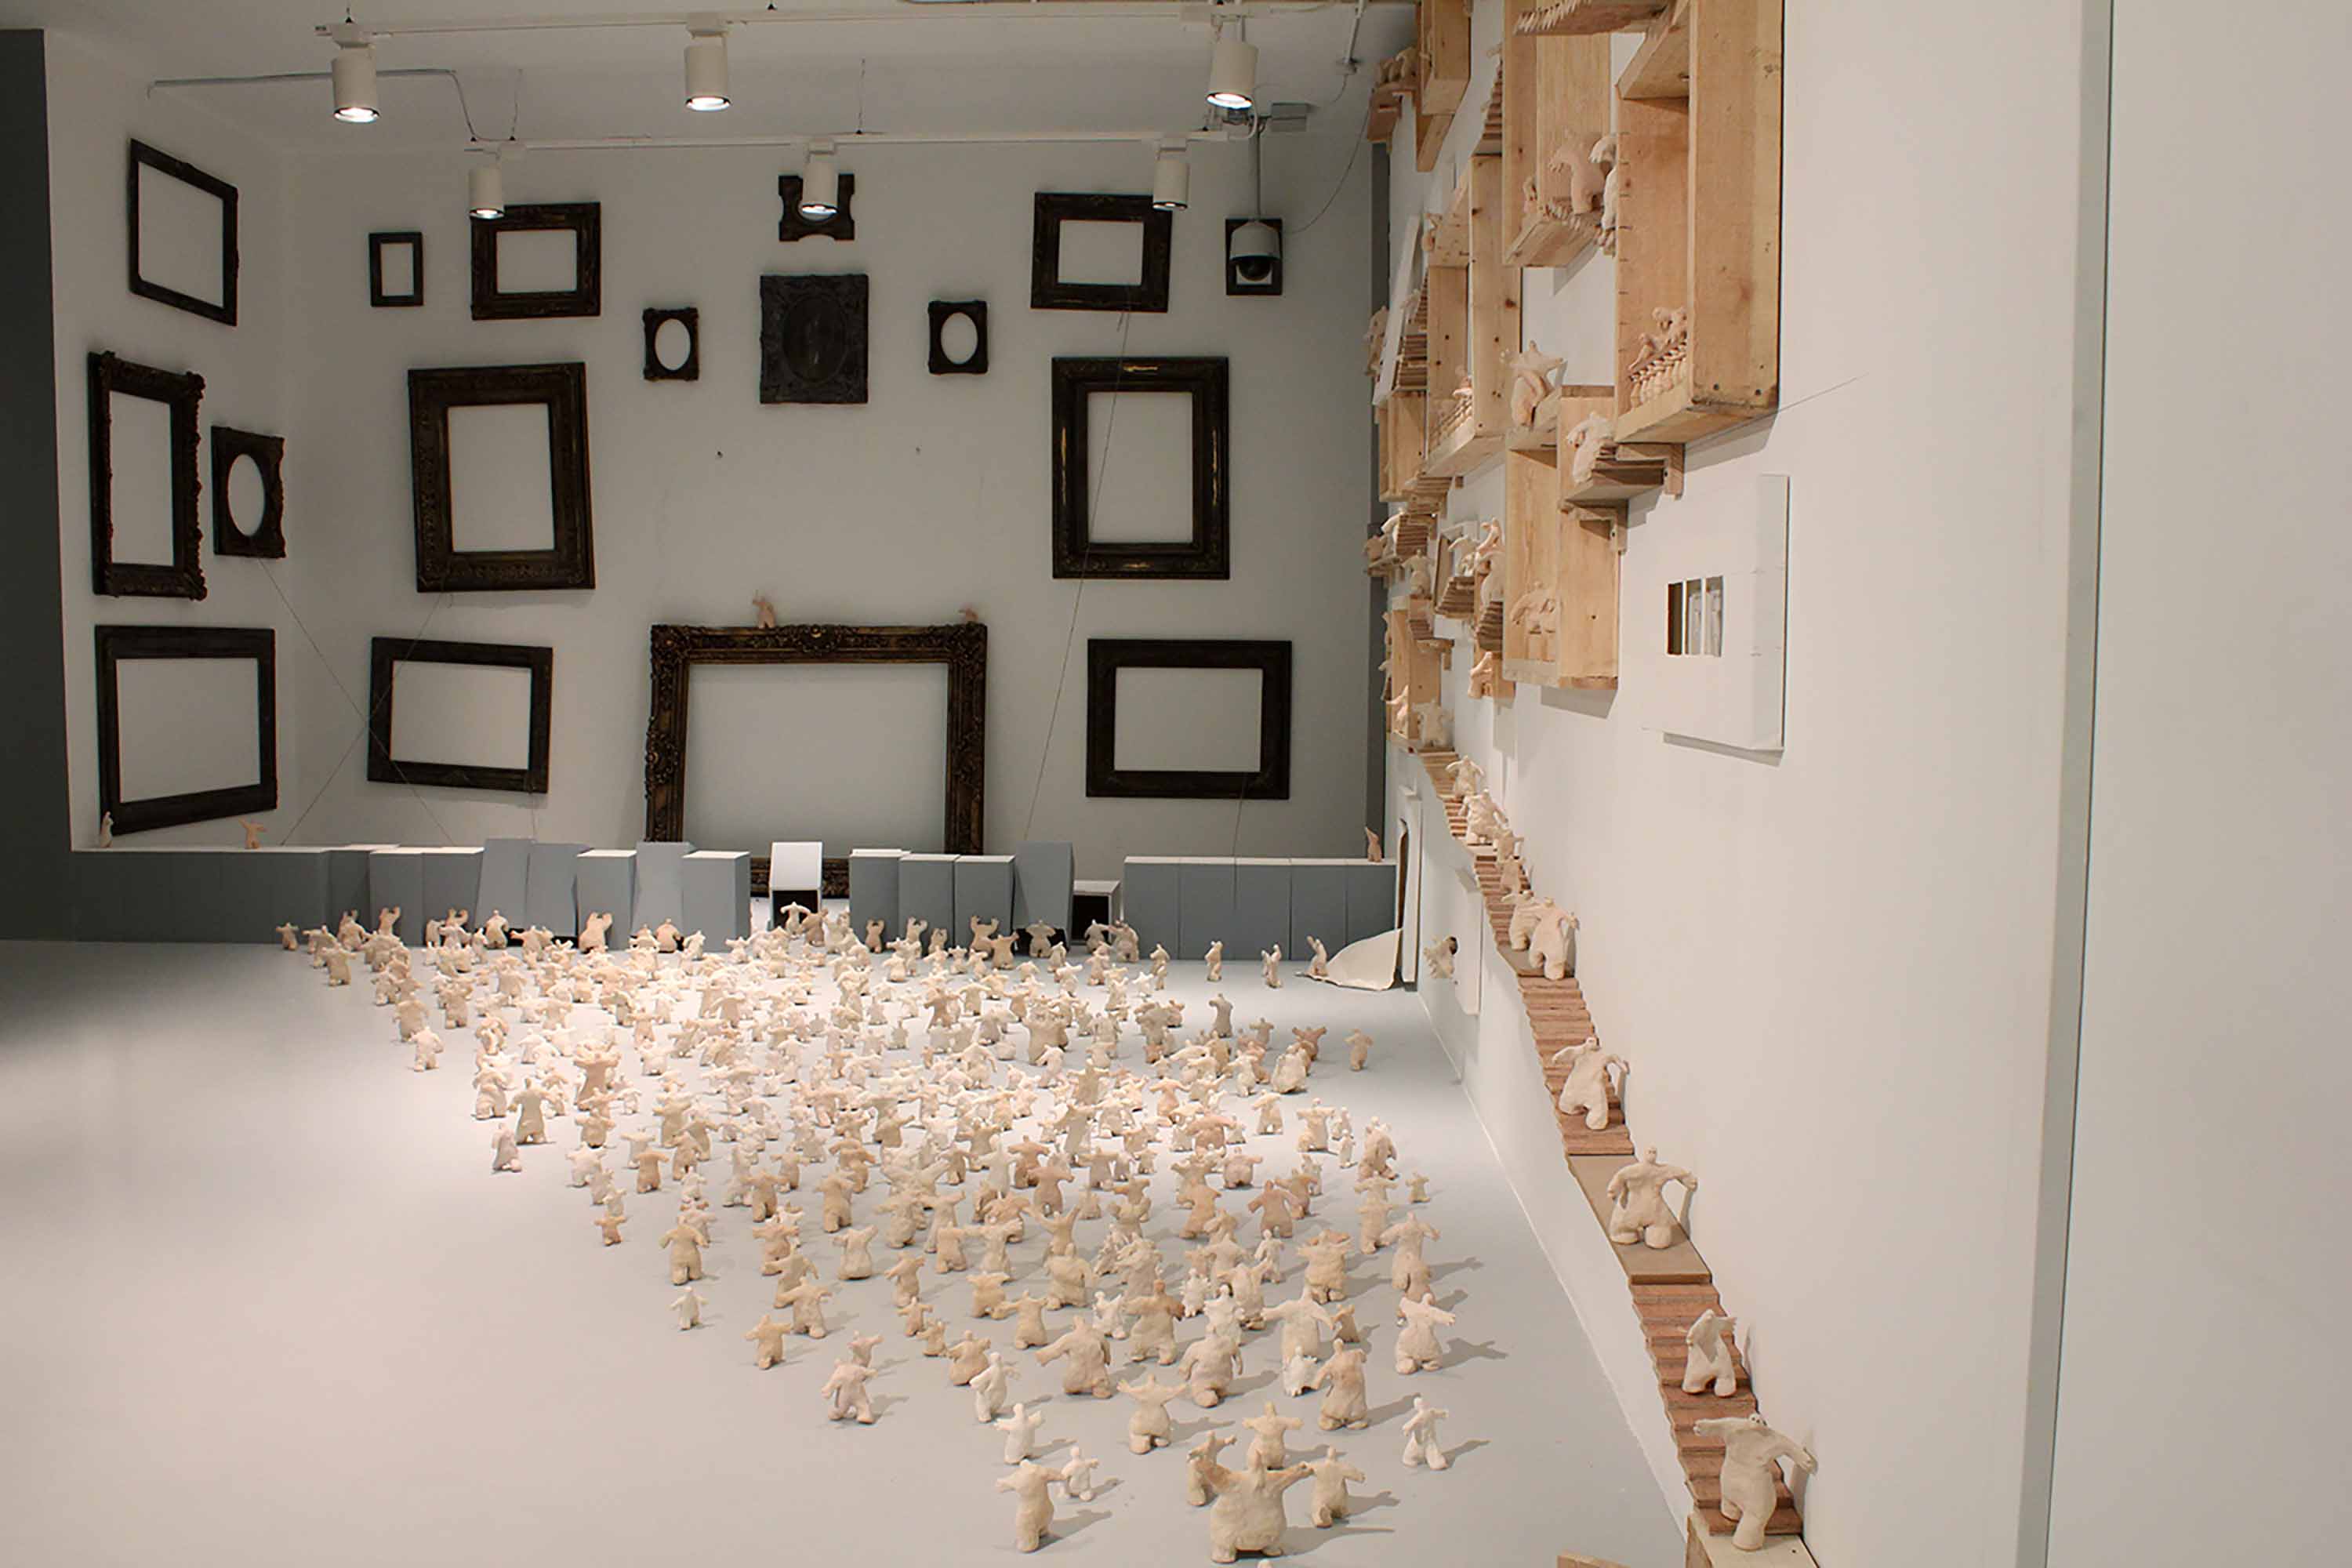 A gallery space with one corner covered in small white figurines on the floor and climbing the wall, knocking down columns and taking over a wooden staircase and windows on the wall.